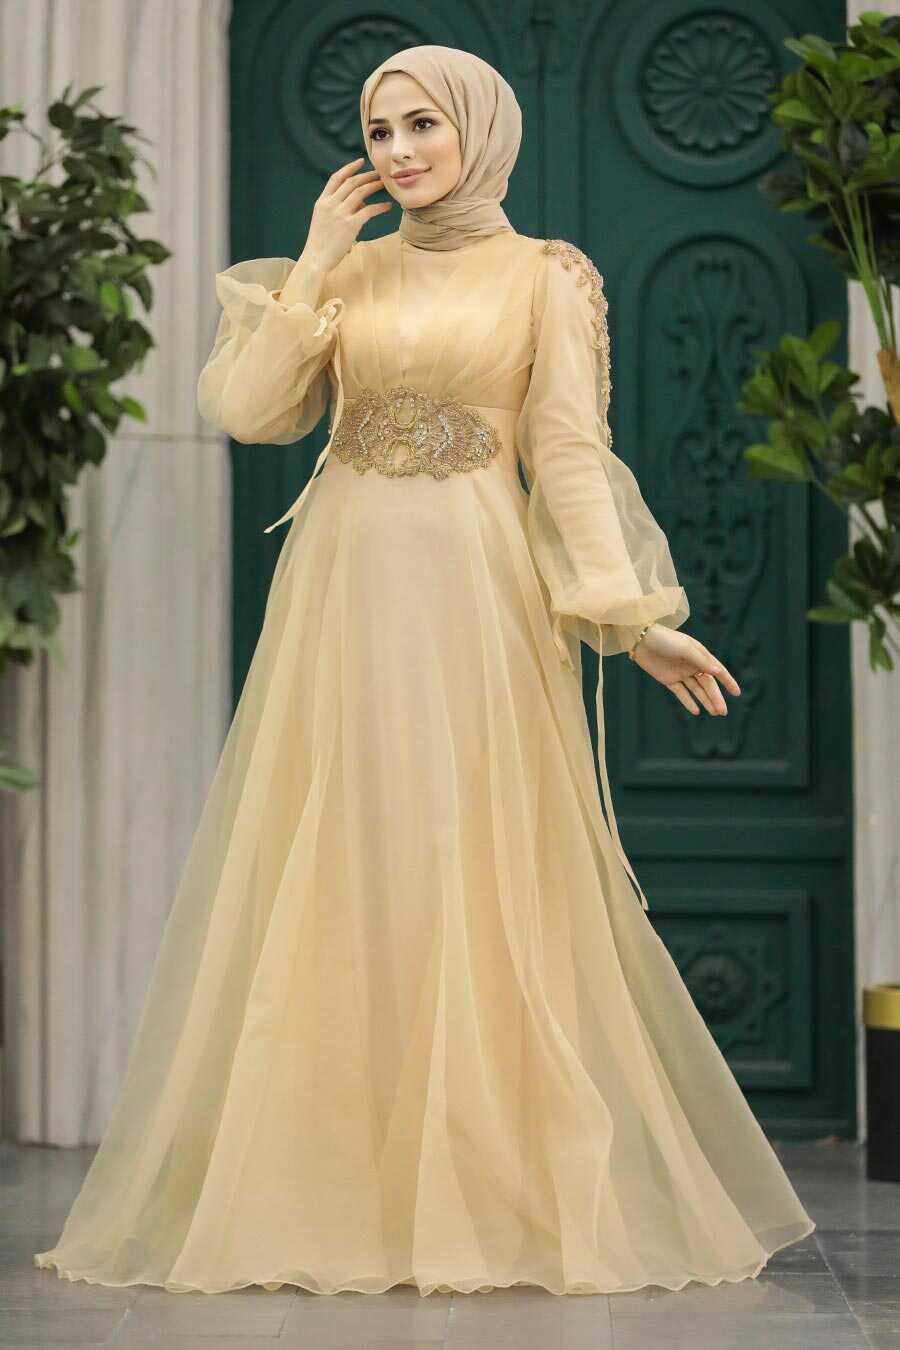 Arabic Luxury Muslim Wedding Dress With Shiny Sequins, Long Sleeves,  Beading, And Hijab Plus Size Muslim Wedding Gown From Dresstop, $225.33 |  DHgate.Com